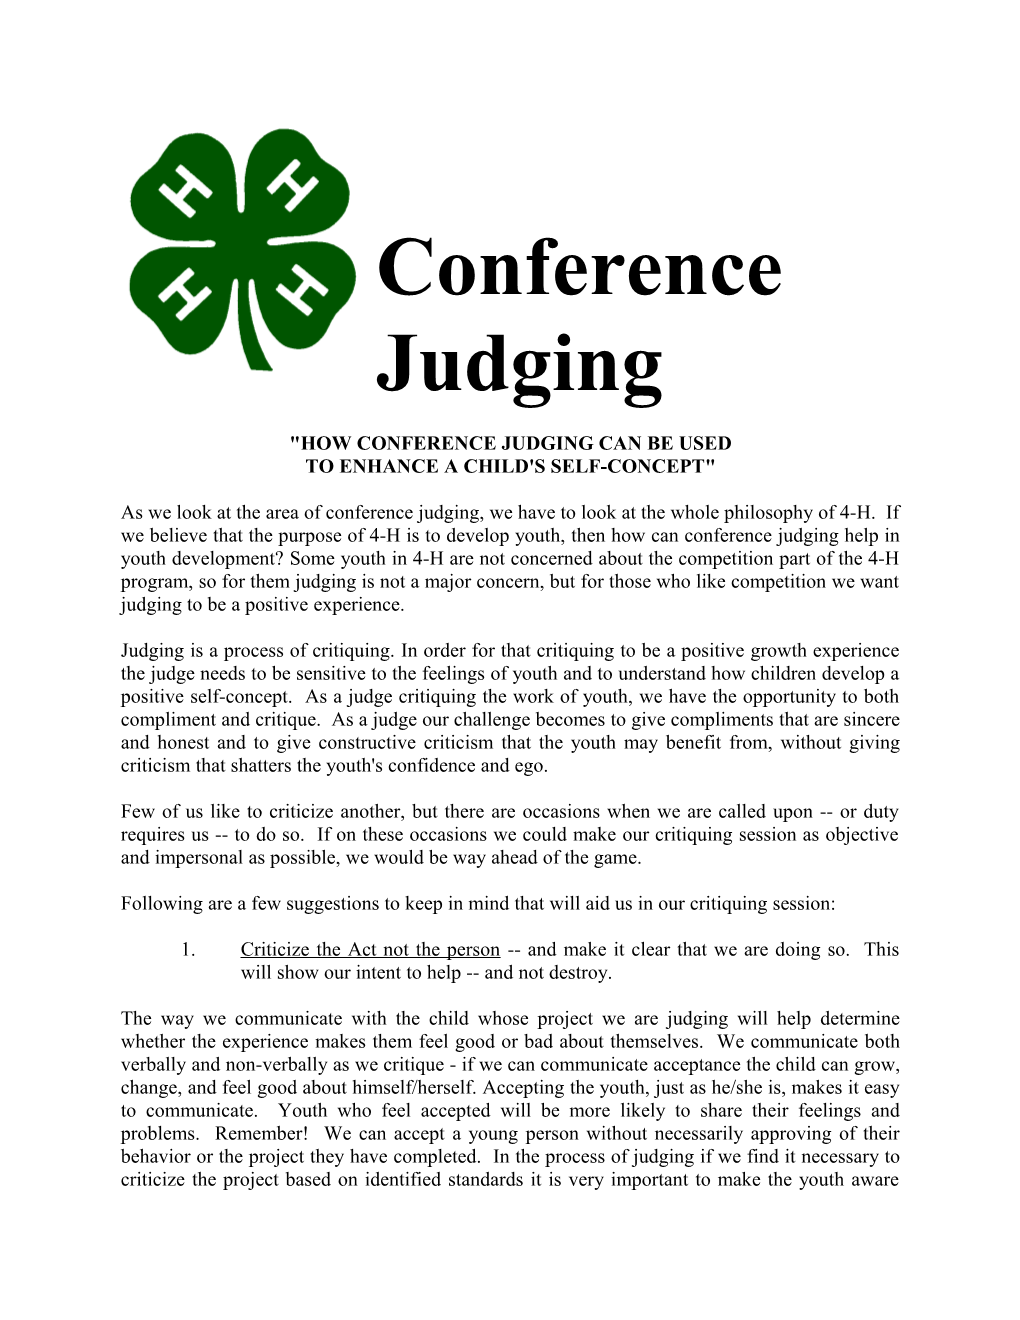 How Conference Judging Can Be Used